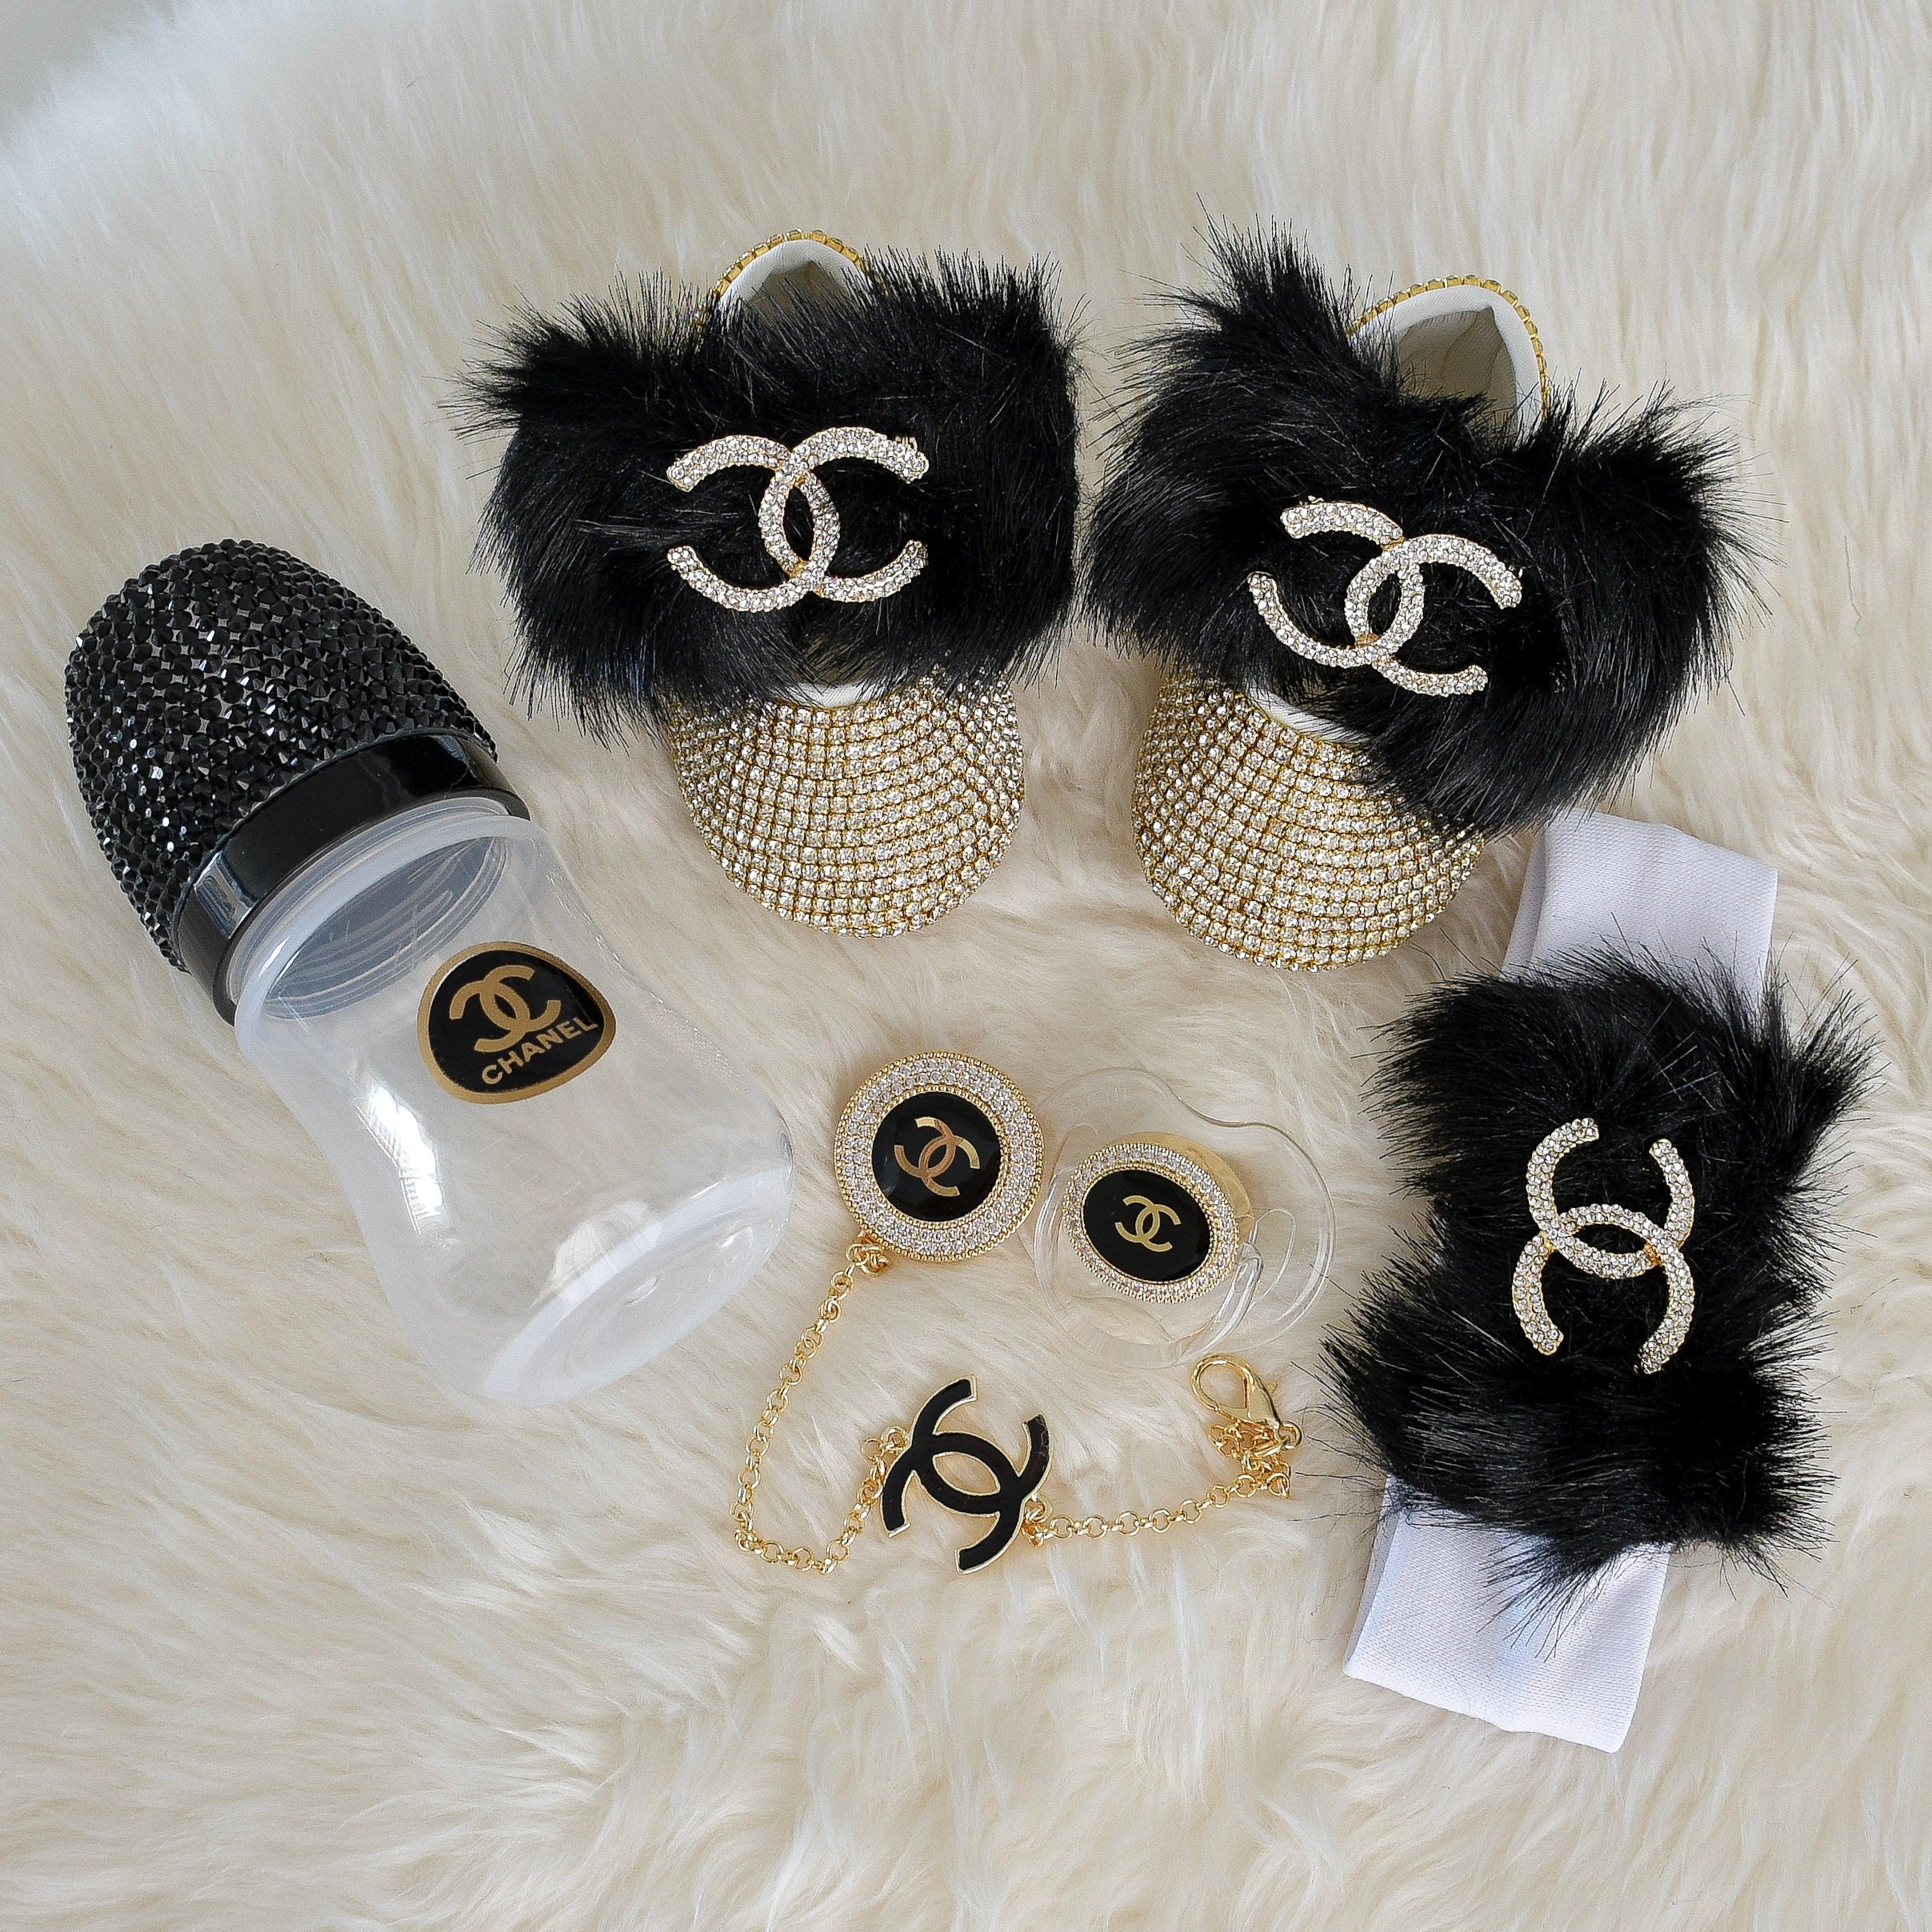 chanel baby shoes